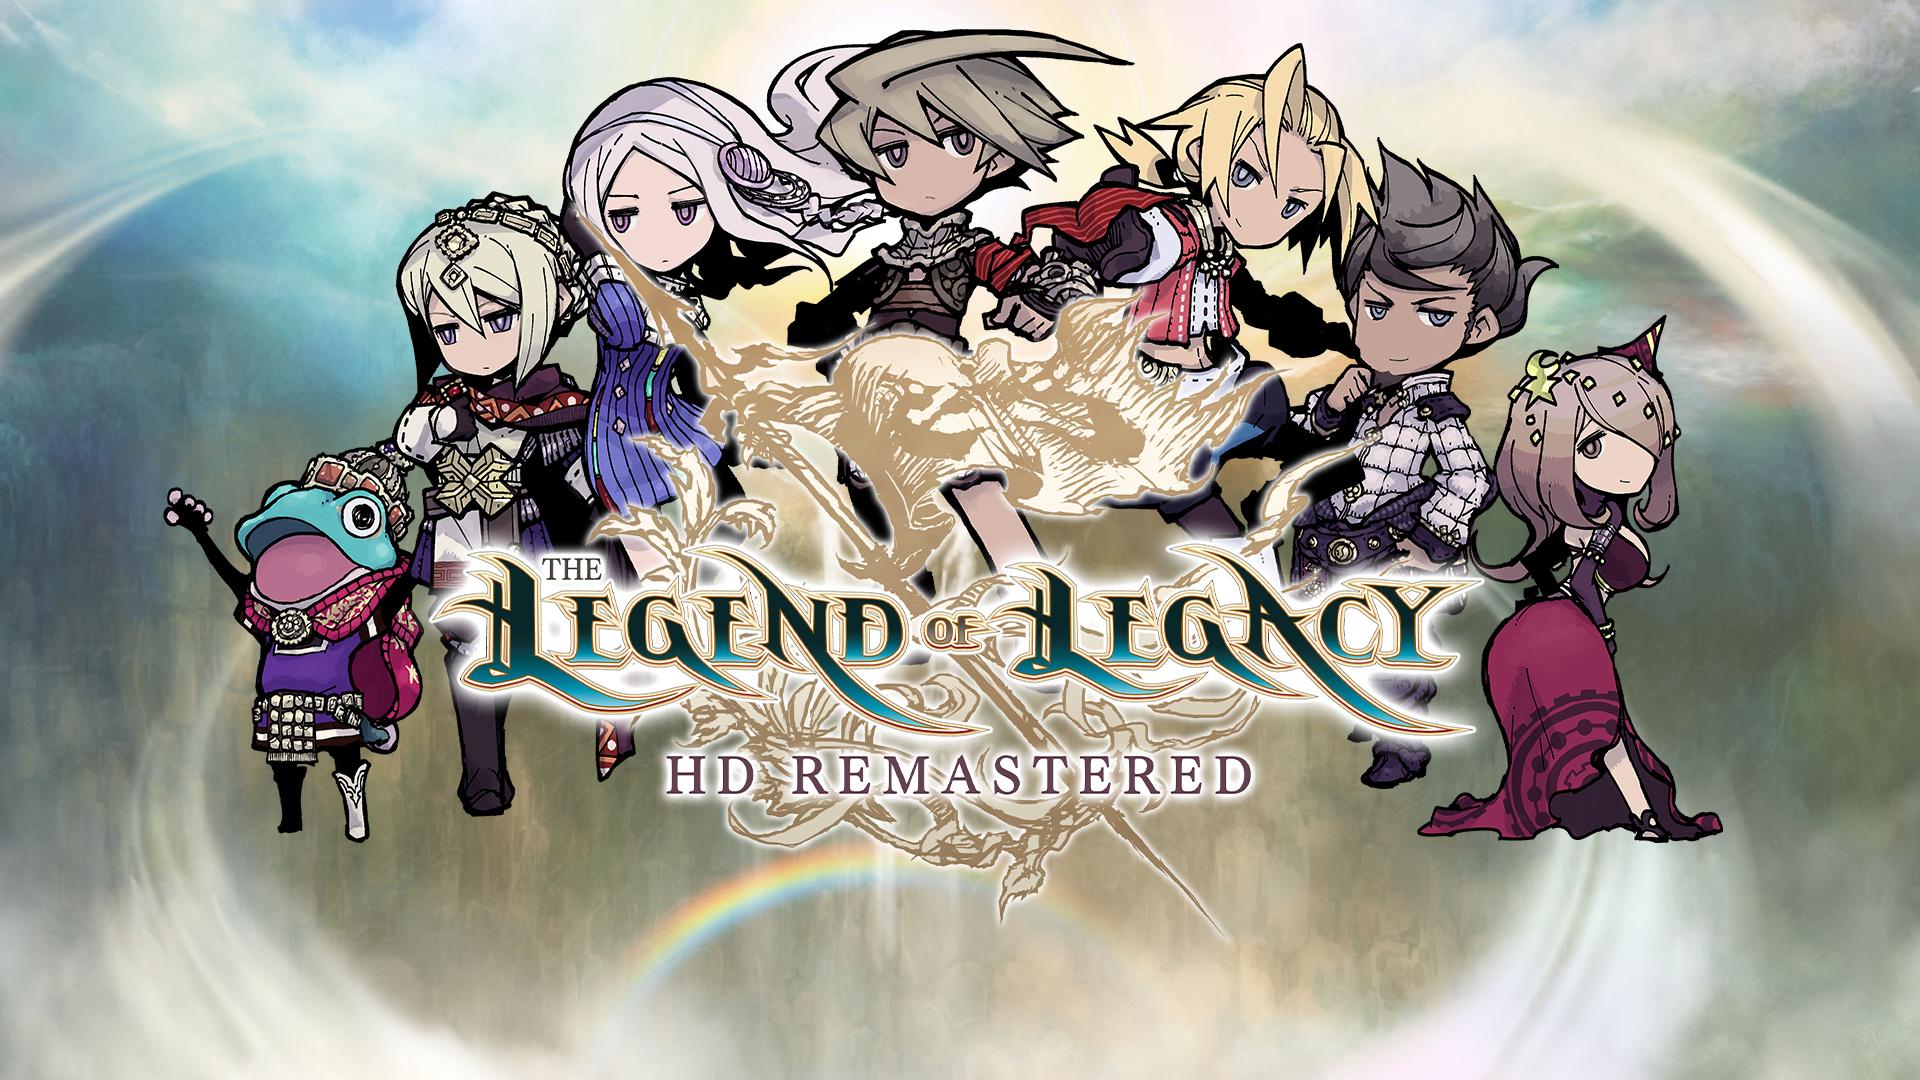 The Legend of Legacy HD Remastered announced for PS5, PS4, Switch